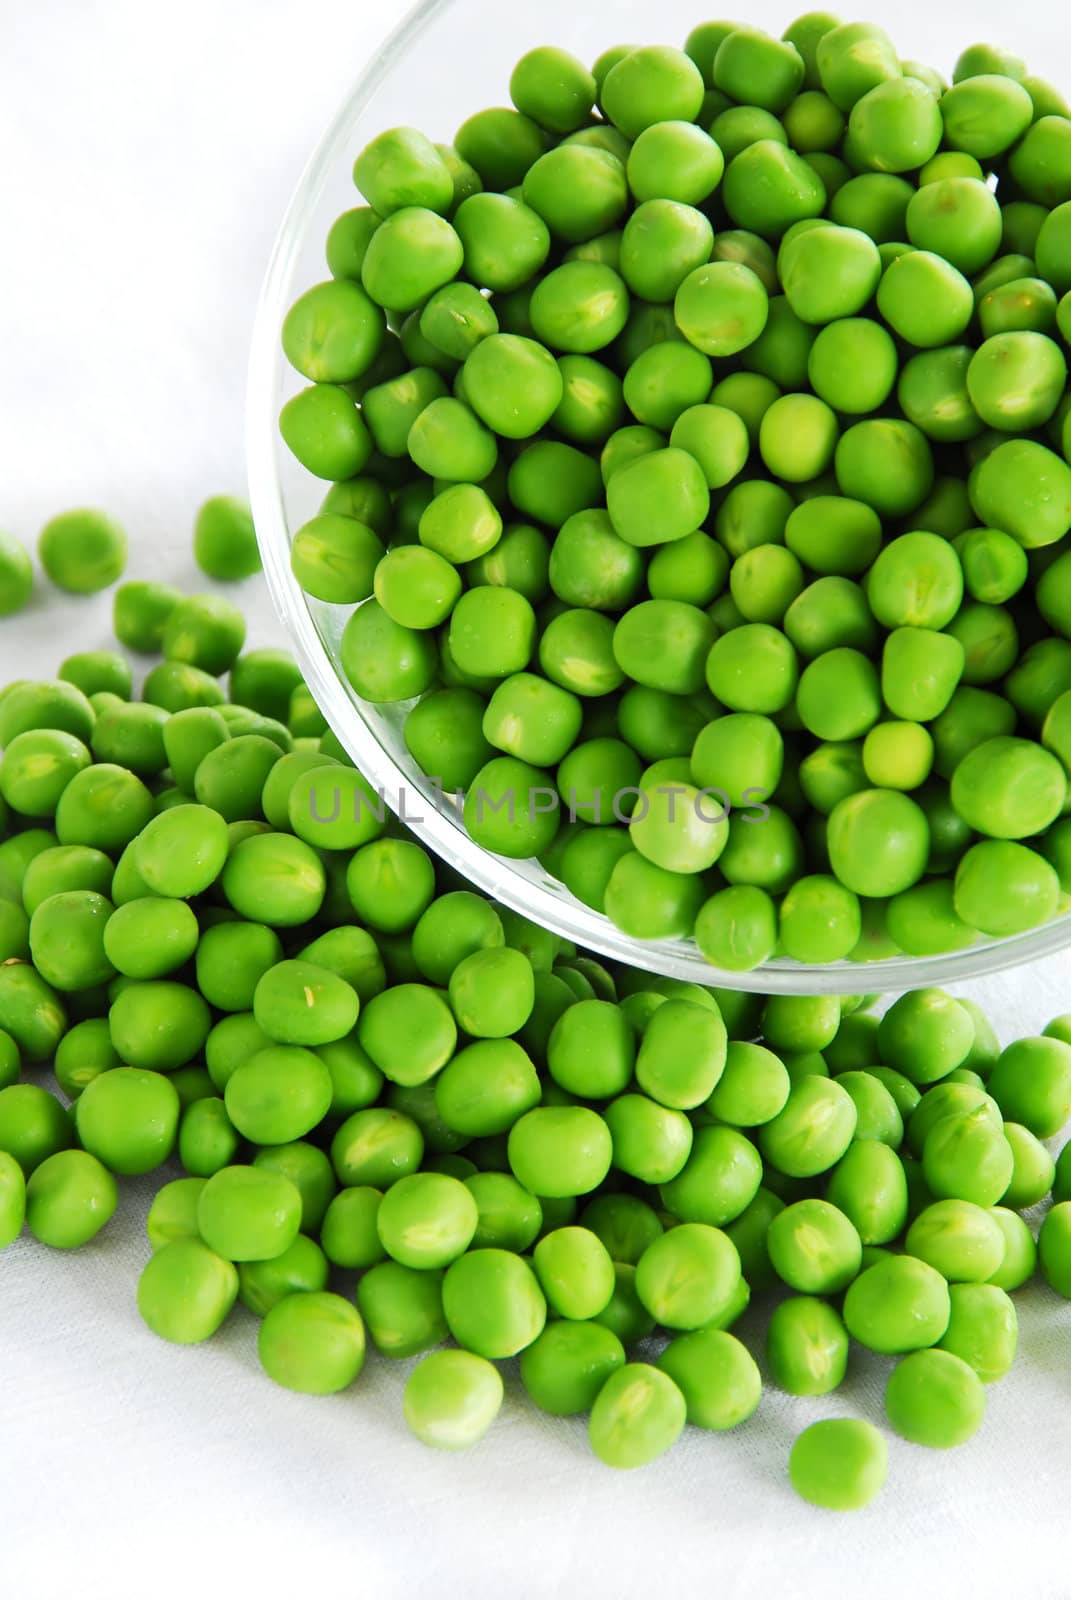 young fresh green spring peas scattered from glass bowl